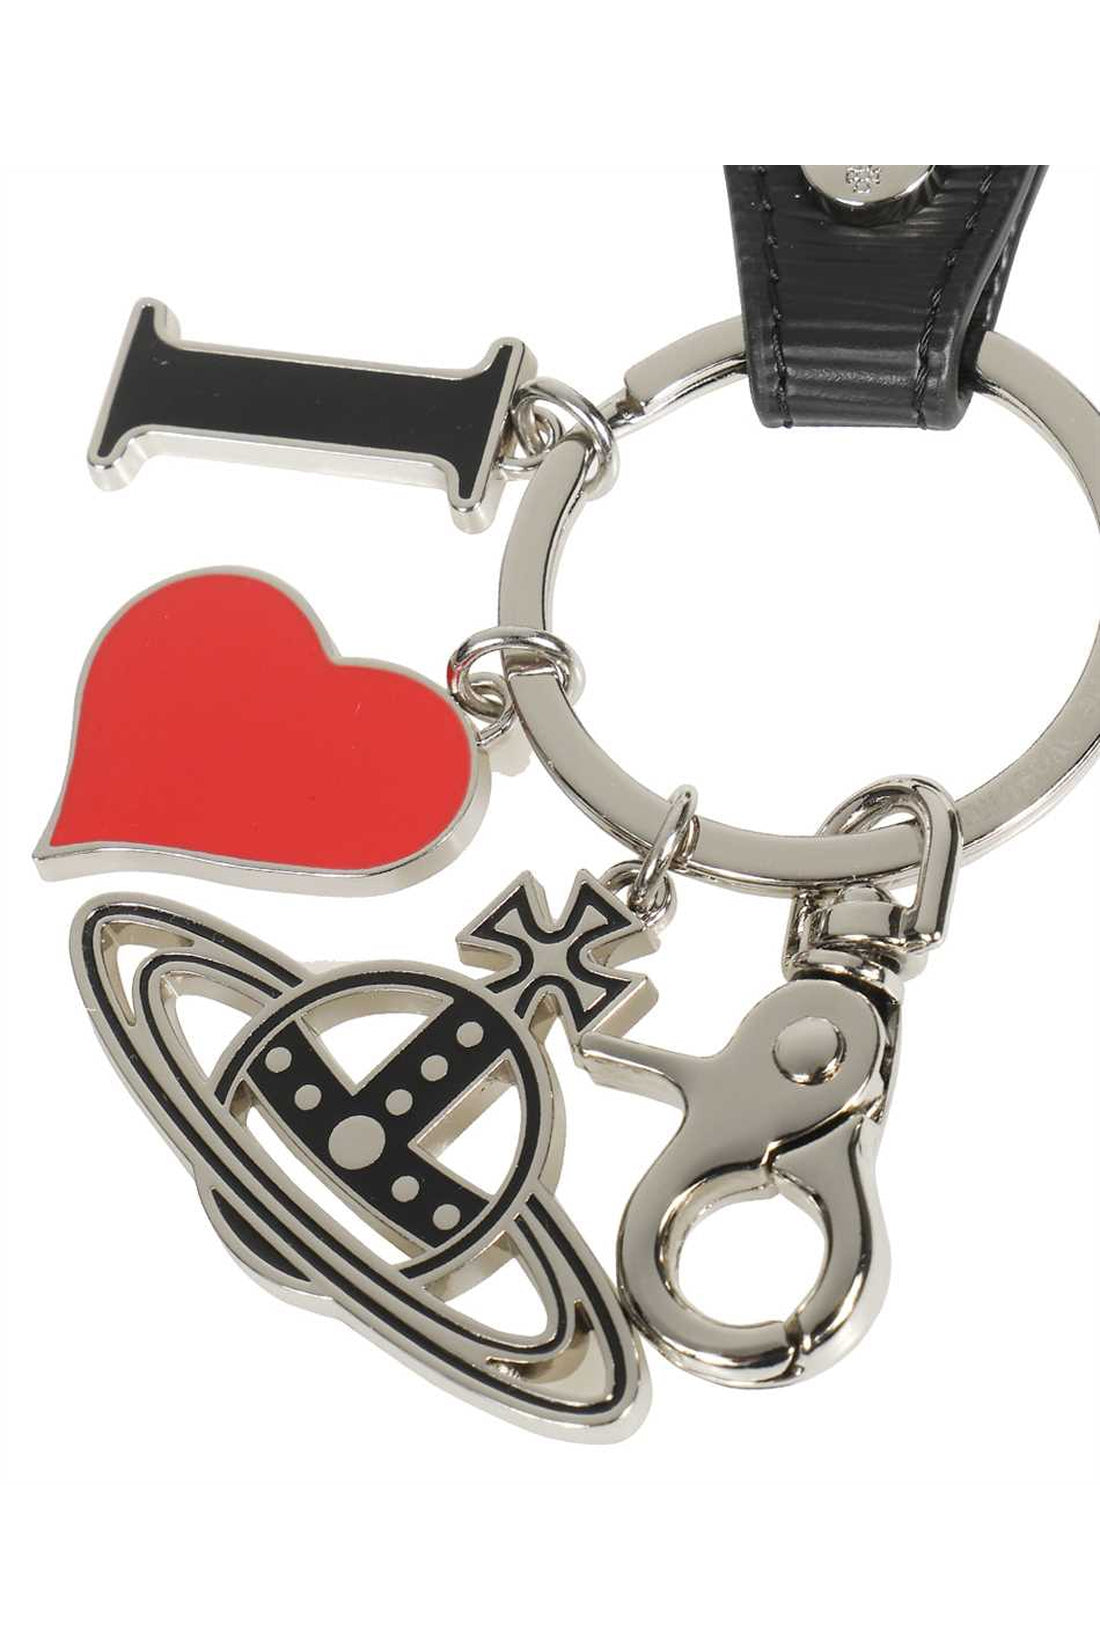 Vivienne Westwood-OUTLET-SALE-Key ring with decorative charms-ARCHIVIST